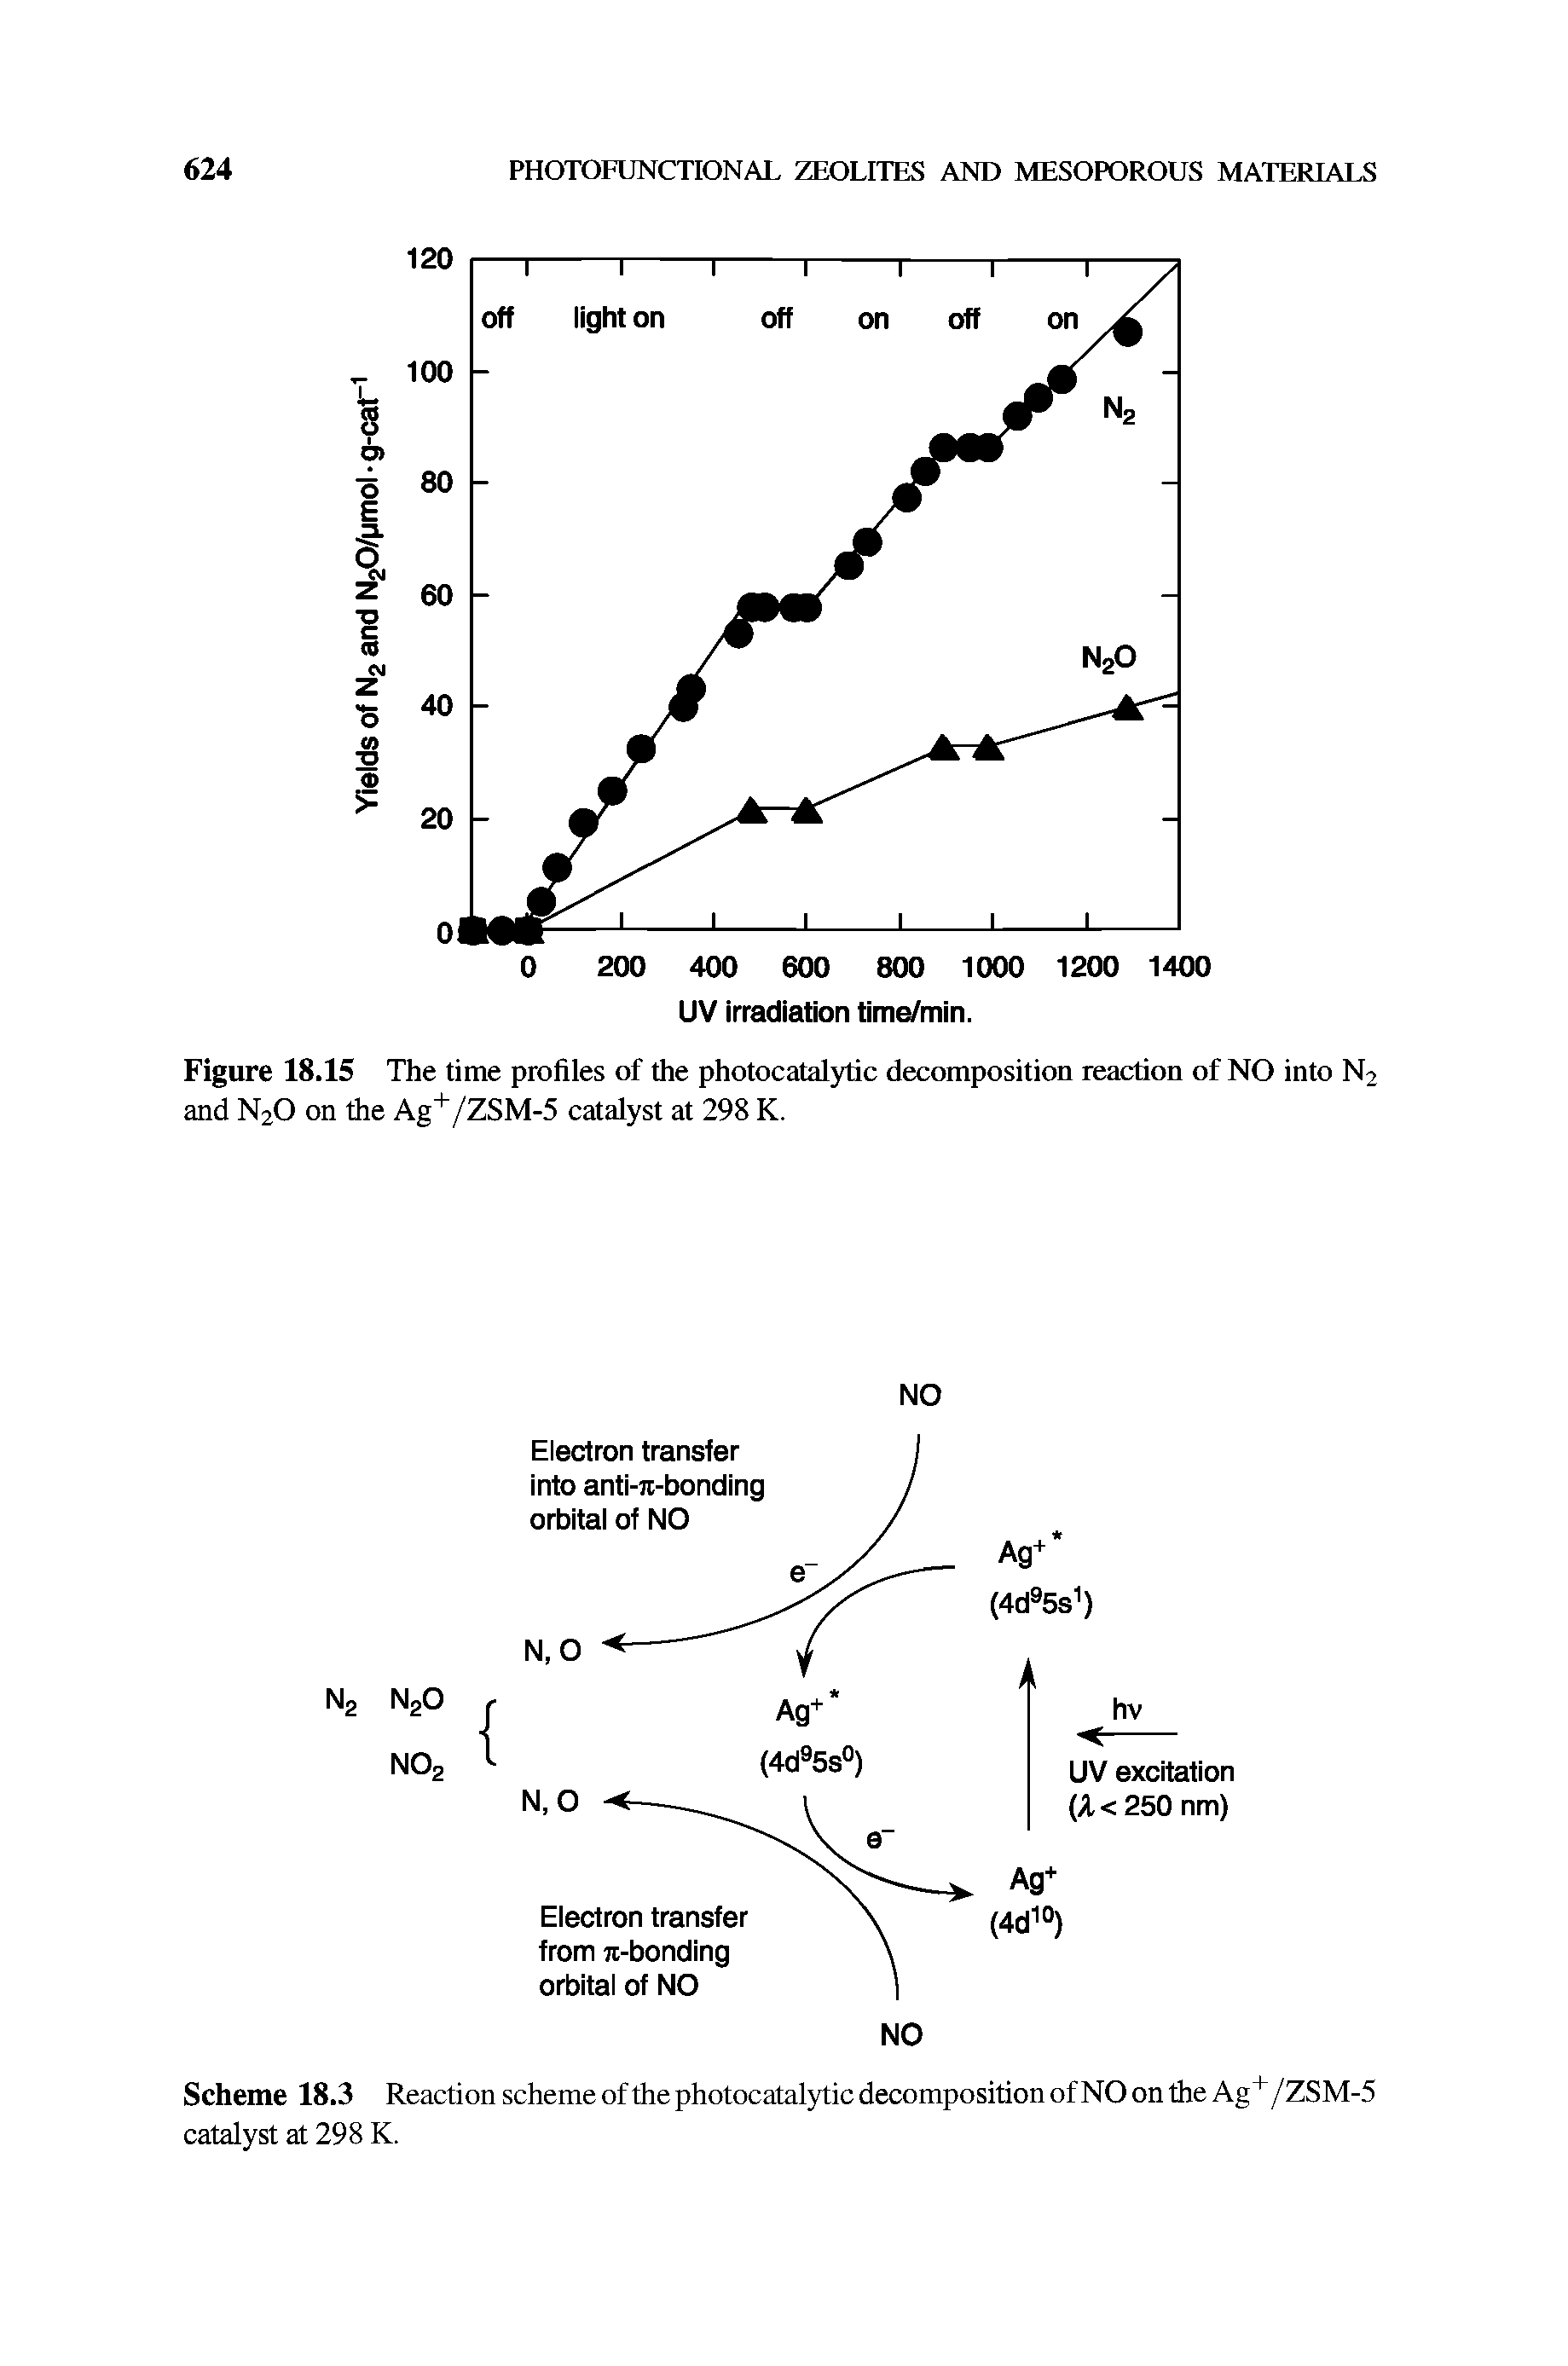 Scheme 18.3 Reaction scheme of the photocatalytic decomposition of NO on the Ag" /ZSM-5 catalyst at 298 K.